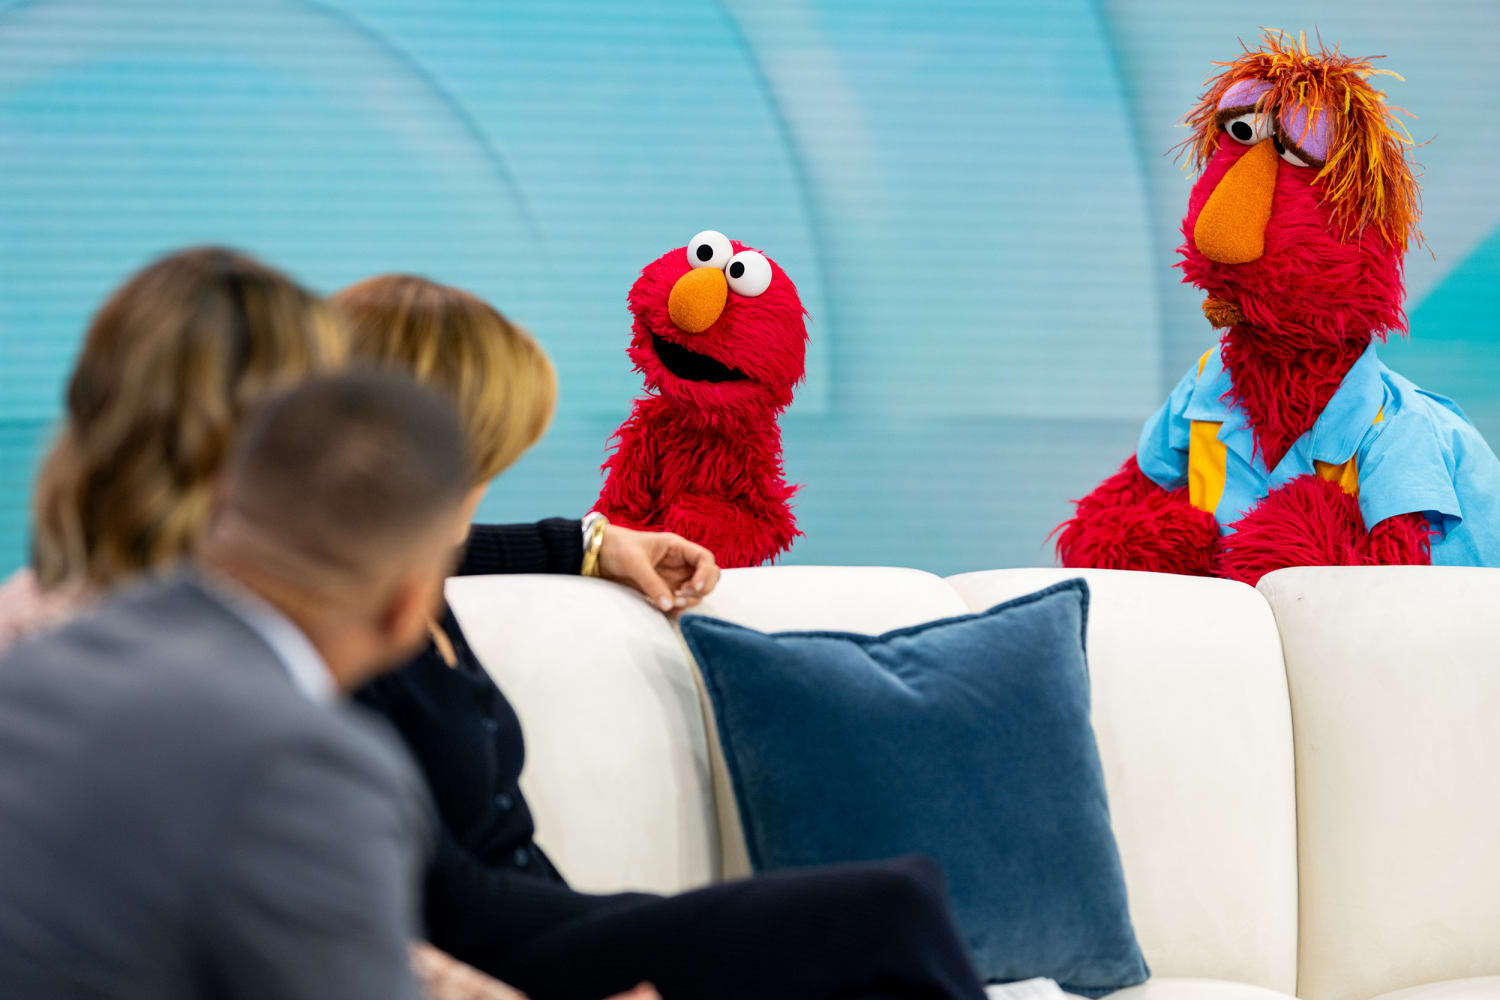 Elmo opened up about his viral sentiment tweet on the “Today” show — and then Larry David showed up